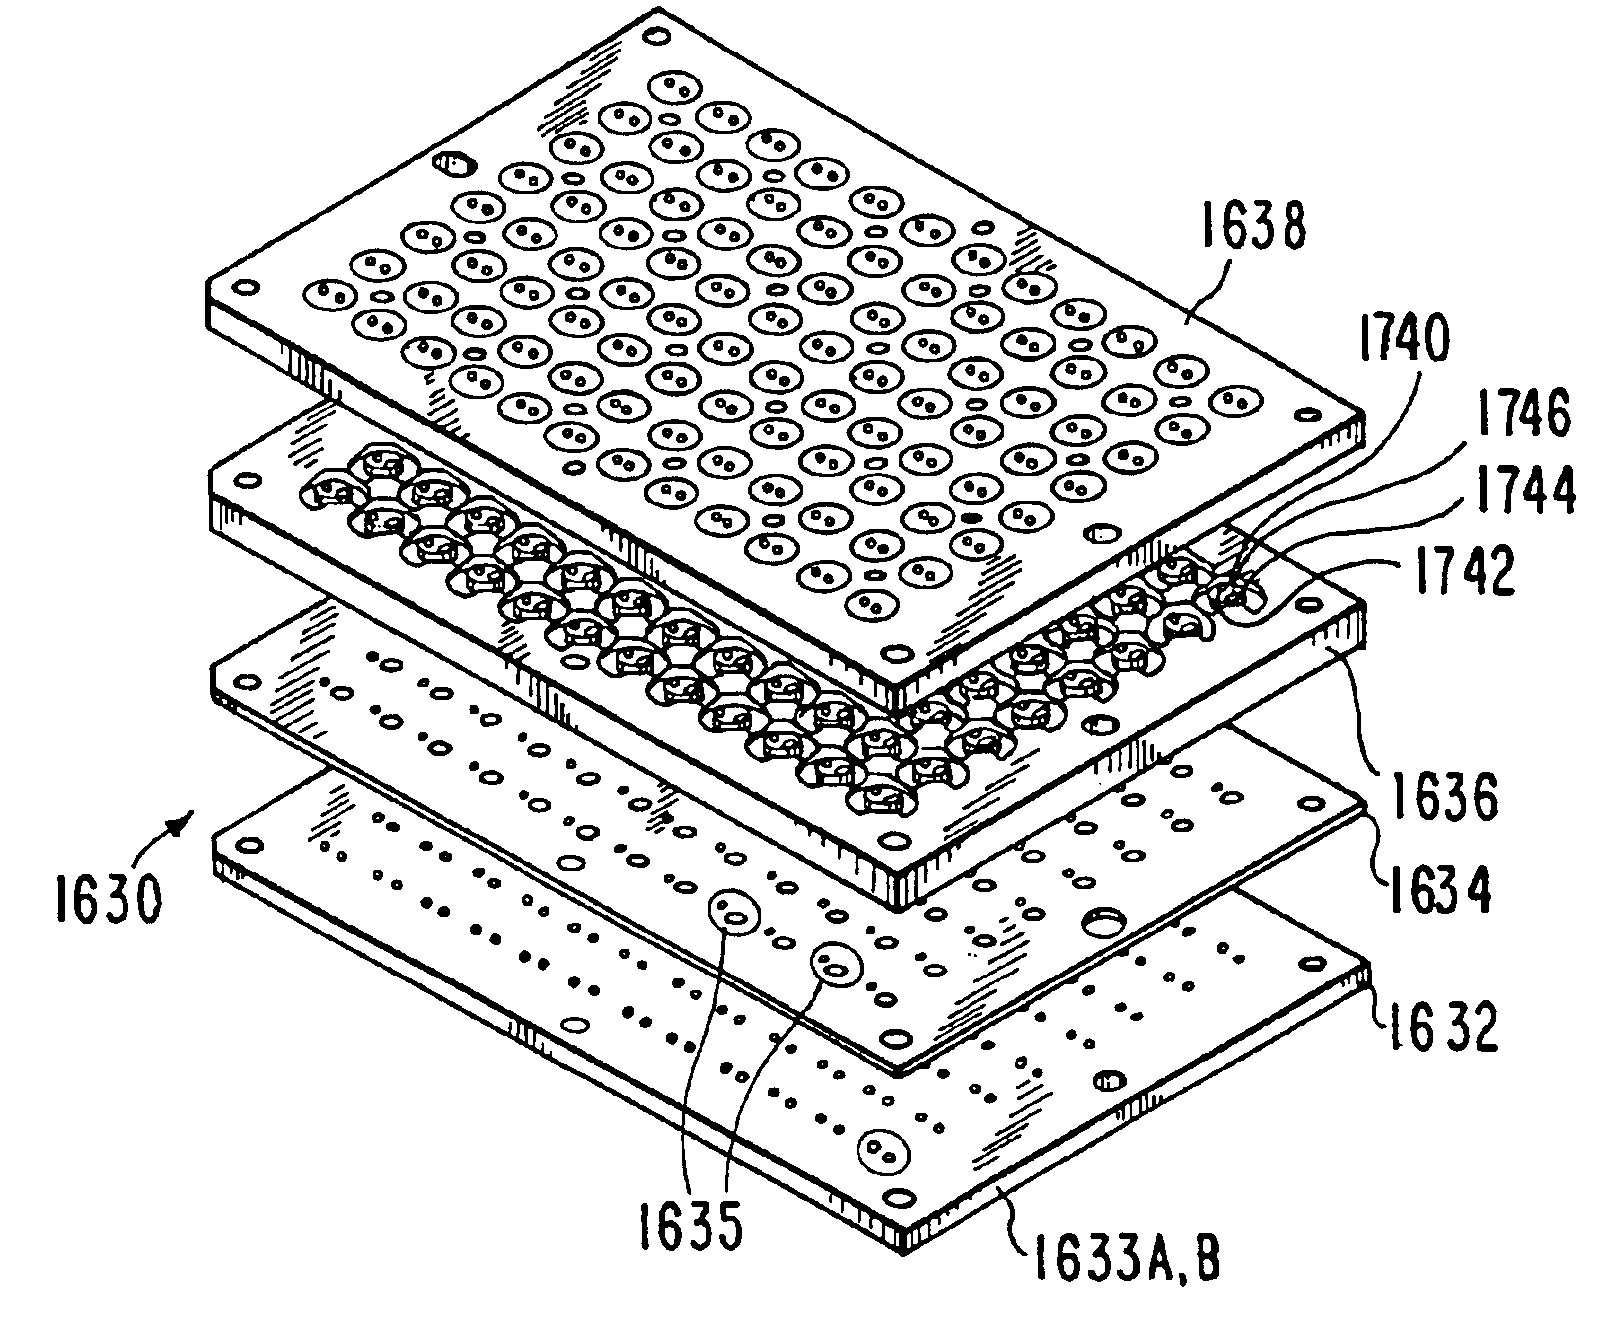 Apparatuses and methods for creating and testing pre-formulations and systems for same